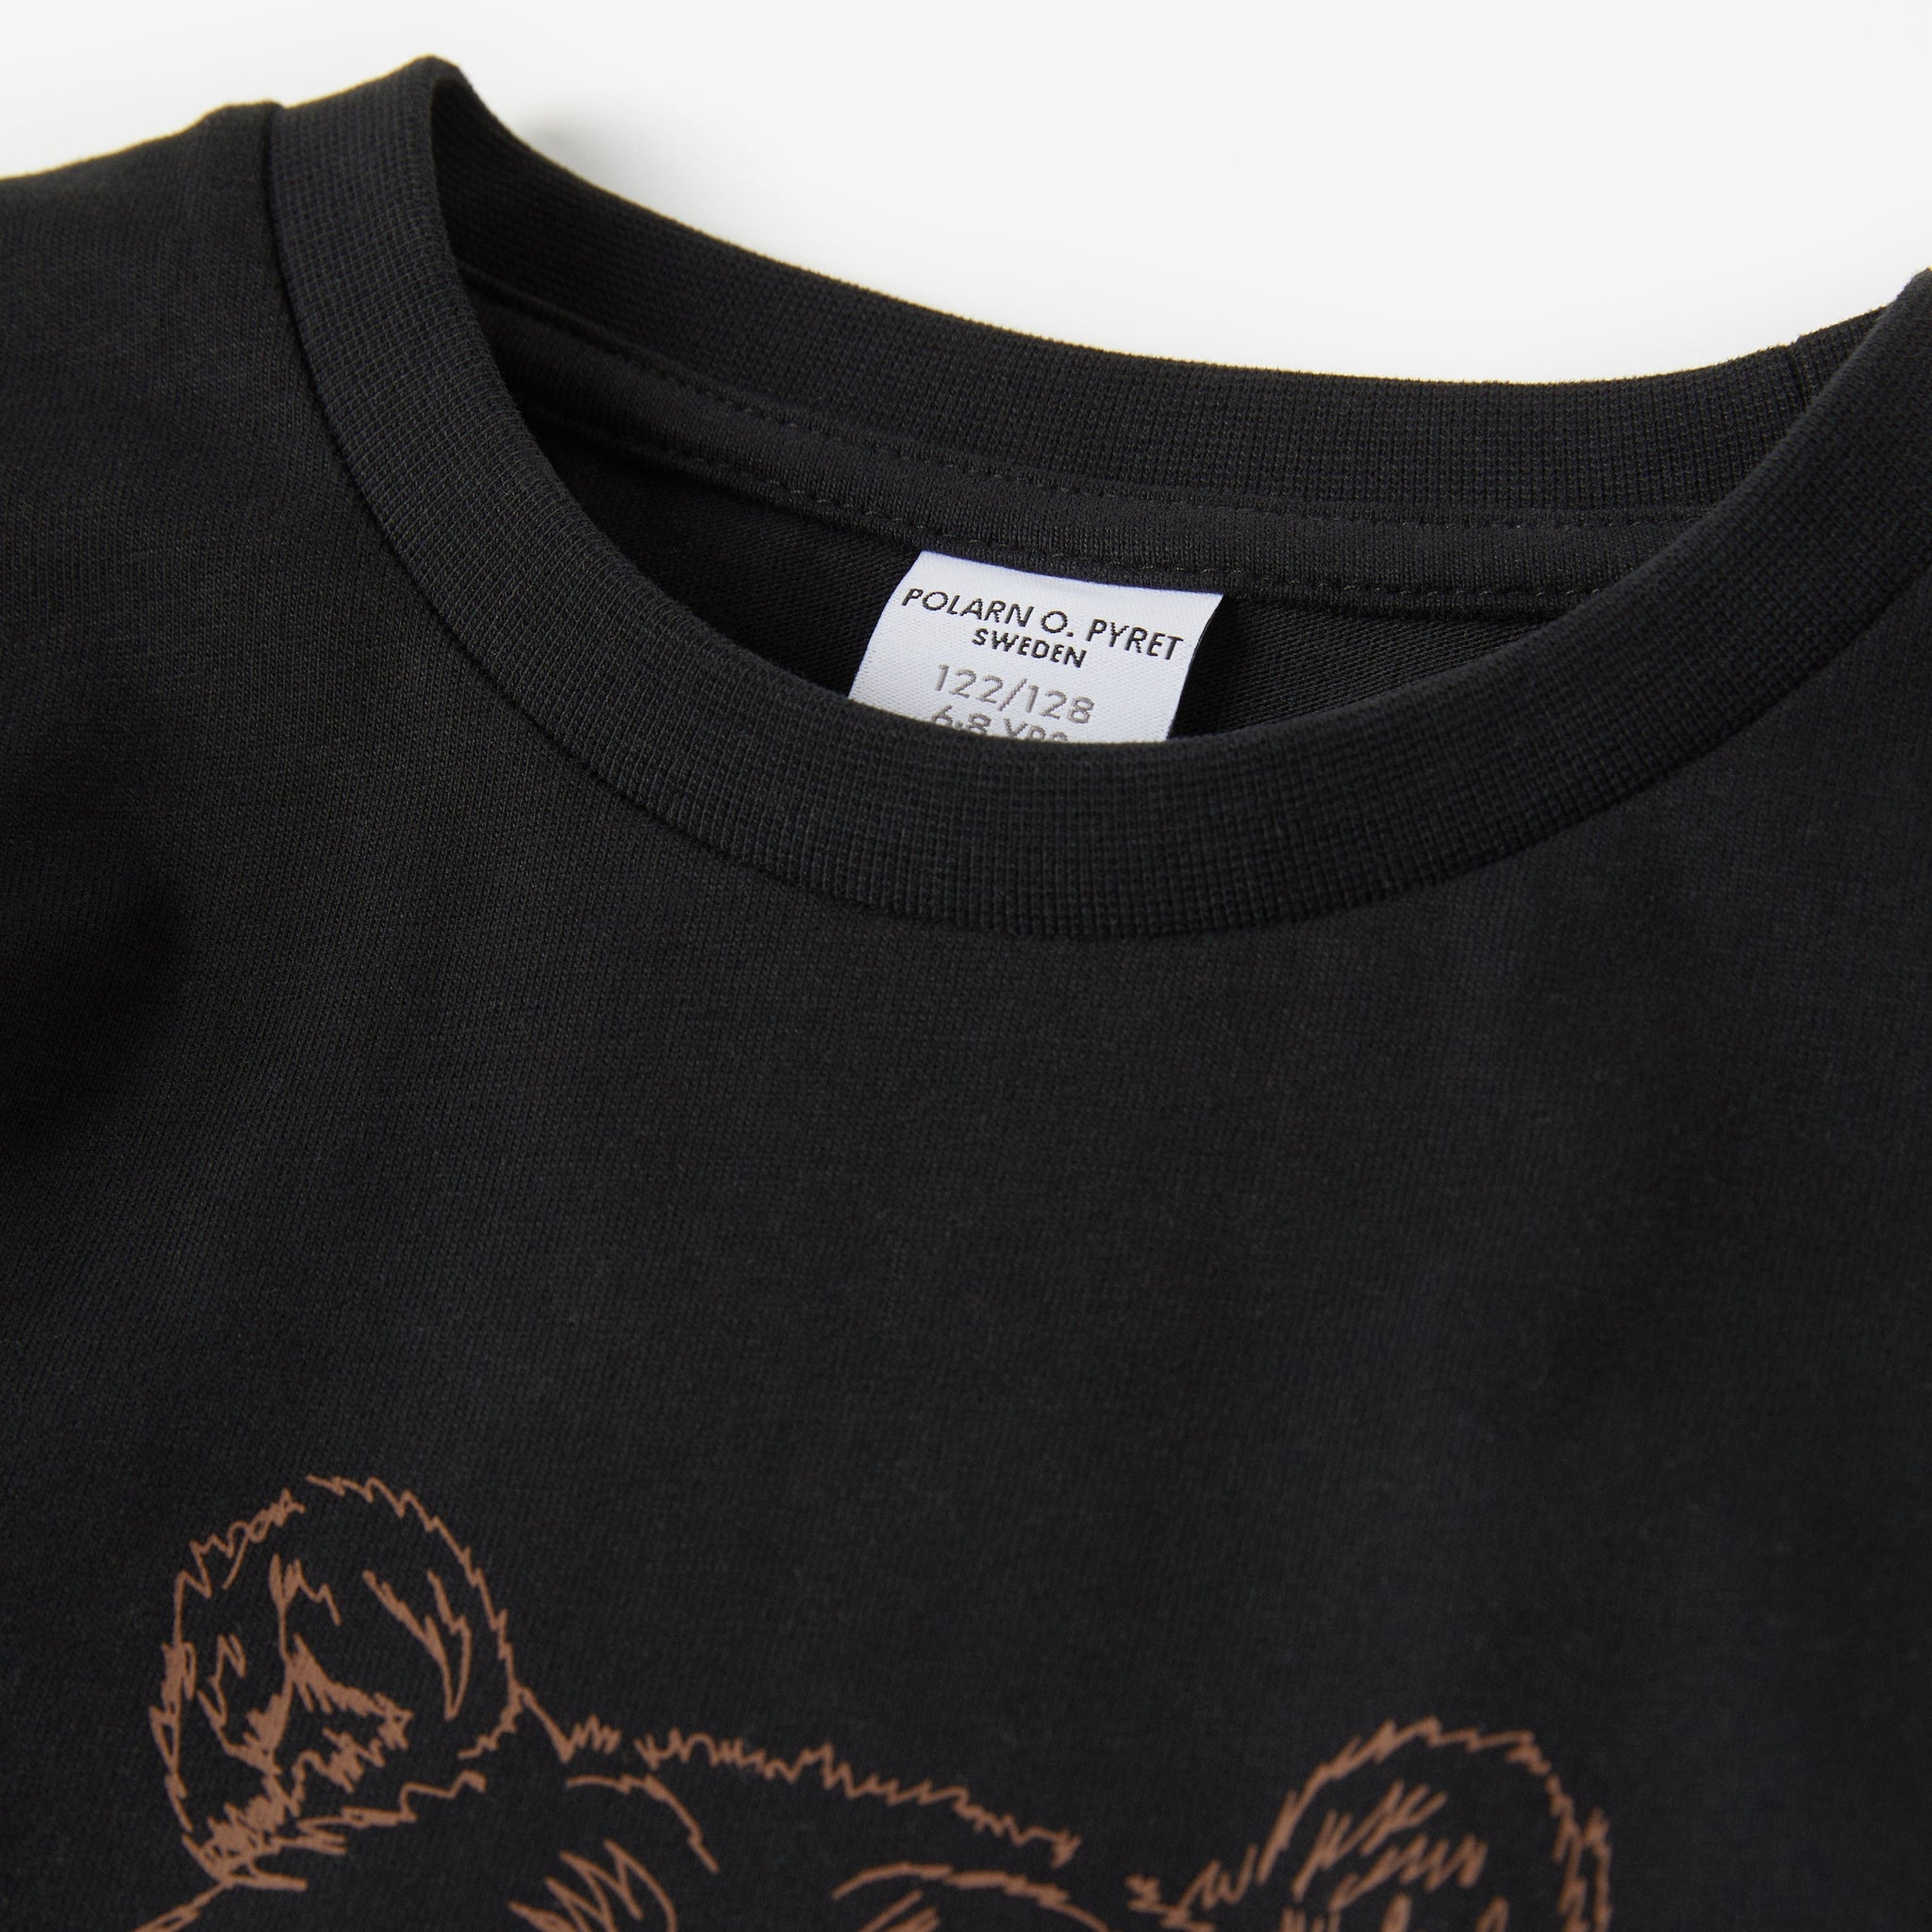 Black Bear Print Kids Top from the Polarn O. Pyret kidswear collection. Ethically produced kids clothing.